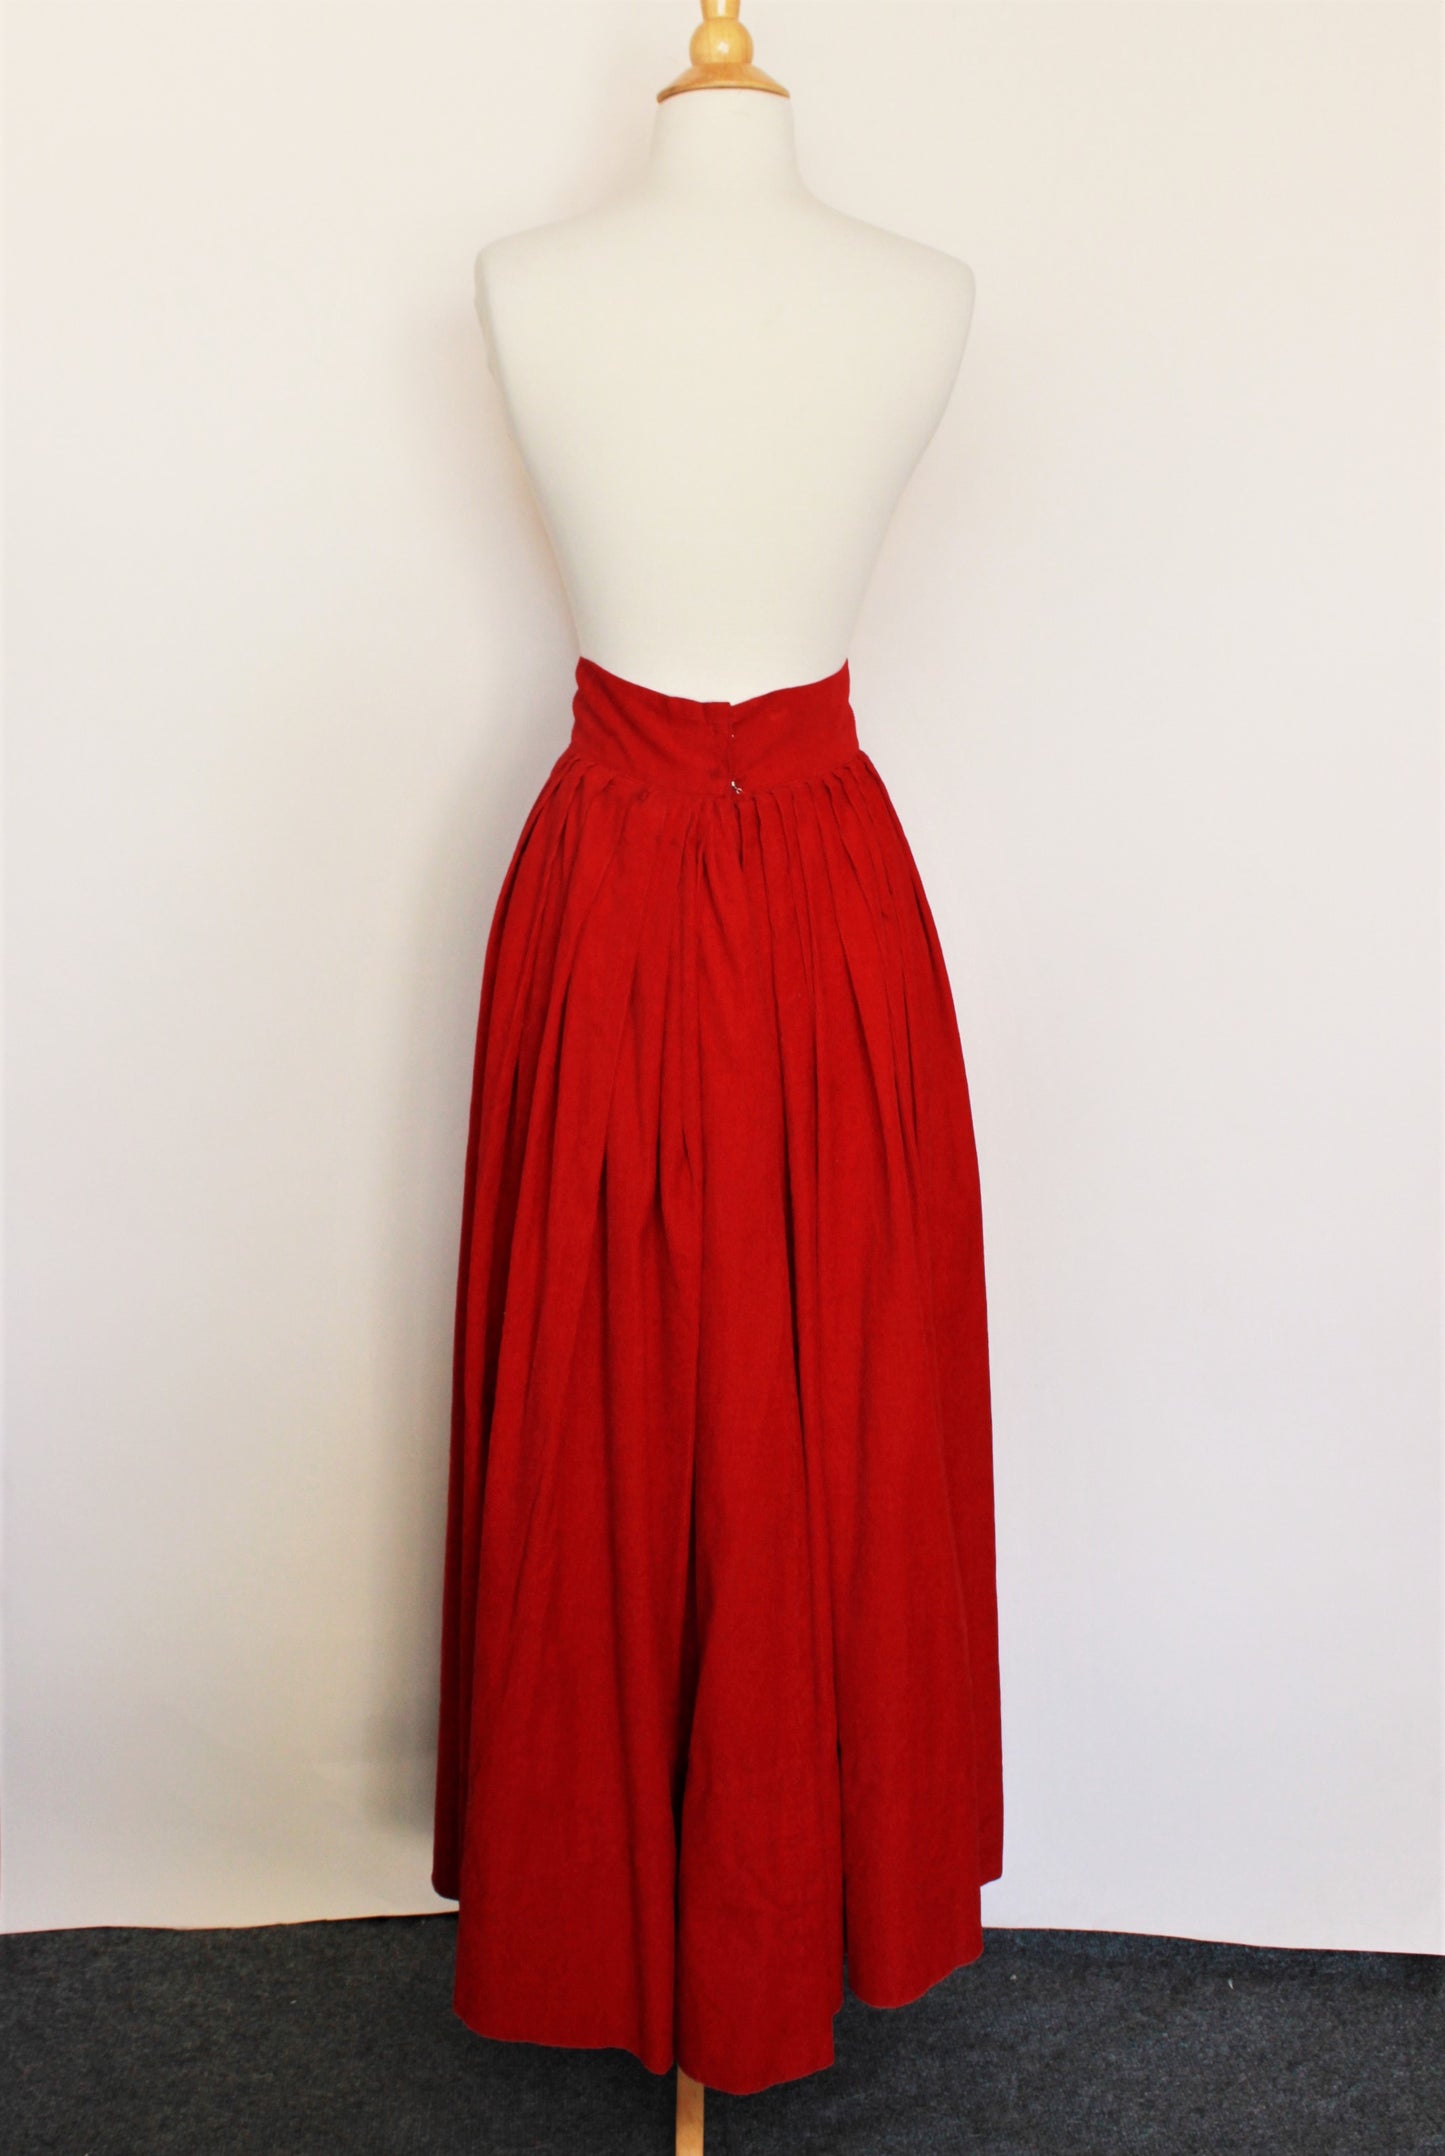 Vintage 1940s Does 1900s Red Corduroy Skirt